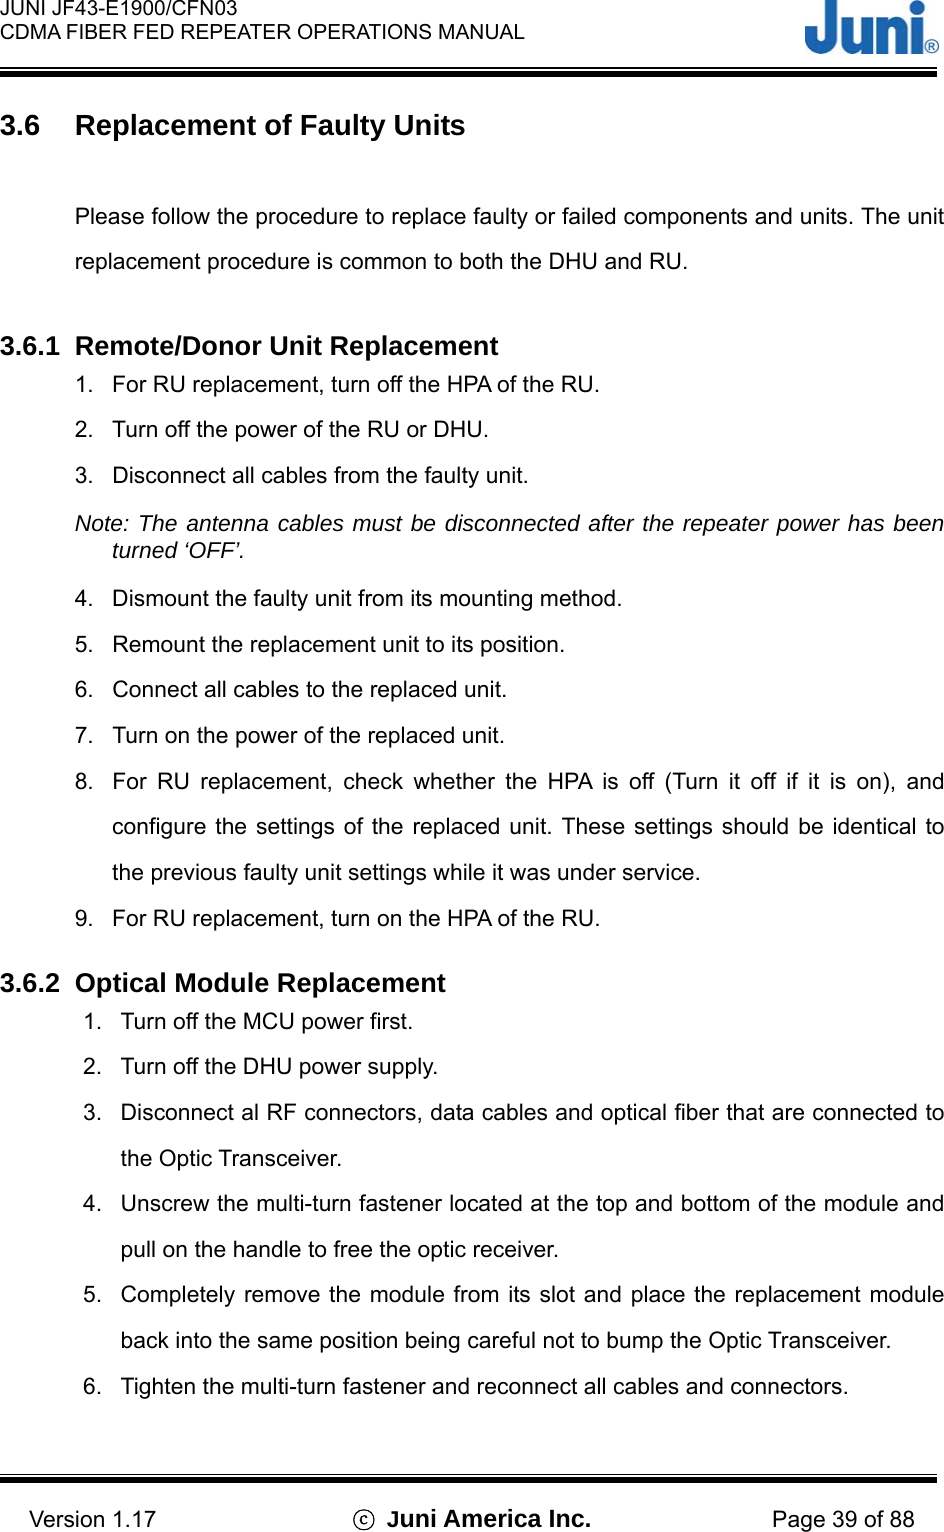  JUNI JF43-E1900/CFN03 CDMA FIBER FED REPEATER OPERATIONS MANUAL                                    Version 1.17  ⓒ Juni America Inc. Page 39 of 88 3.6  Replacement of Faulty Units  Please follow the procedure to replace faulty or failed components and units. The unit replacement procedure is common to both the DHU and RU.  3.6.1  Remote/Donor Unit Replacement 1.  For RU replacement, turn off the HPA of the RU. 2.  Turn off the power of the RU or DHU. 3.  Disconnect all cables from the faulty unit. Note: The antenna cables must be disconnected after the repeater power has been turned ‘OFF’. 4.  Dismount the faulty unit from its mounting method. 5.  Remount the replacement unit to its position. 6.  Connect all cables to the replaced unit. 7.  Turn on the power of the replaced unit. 8.  For RU replacement, check whether the HPA is off (Turn it off if it is on), and configure the settings of the replaced unit. These settings should be identical to the previous faulty unit settings while it was under service. 9.  For RU replacement, turn on the HPA of the RU.  3.6.2  Optical Module Replacement 1.  Turn off the MCU power first. 2.  Turn off the DHU power supply. 3.  Disconnect al RF connectors, data cables and optical fiber that are connected to the Optic Transceiver. 4.  Unscrew the multi-turn fastener located at the top and bottom of the module and pull on the handle to free the optic receiver. 5.  Completely remove the module from its slot and place the replacement module back into the same position being careful not to bump the Optic Transceiver. 6.  Tighten the multi-turn fastener and reconnect all cables and connectors.  